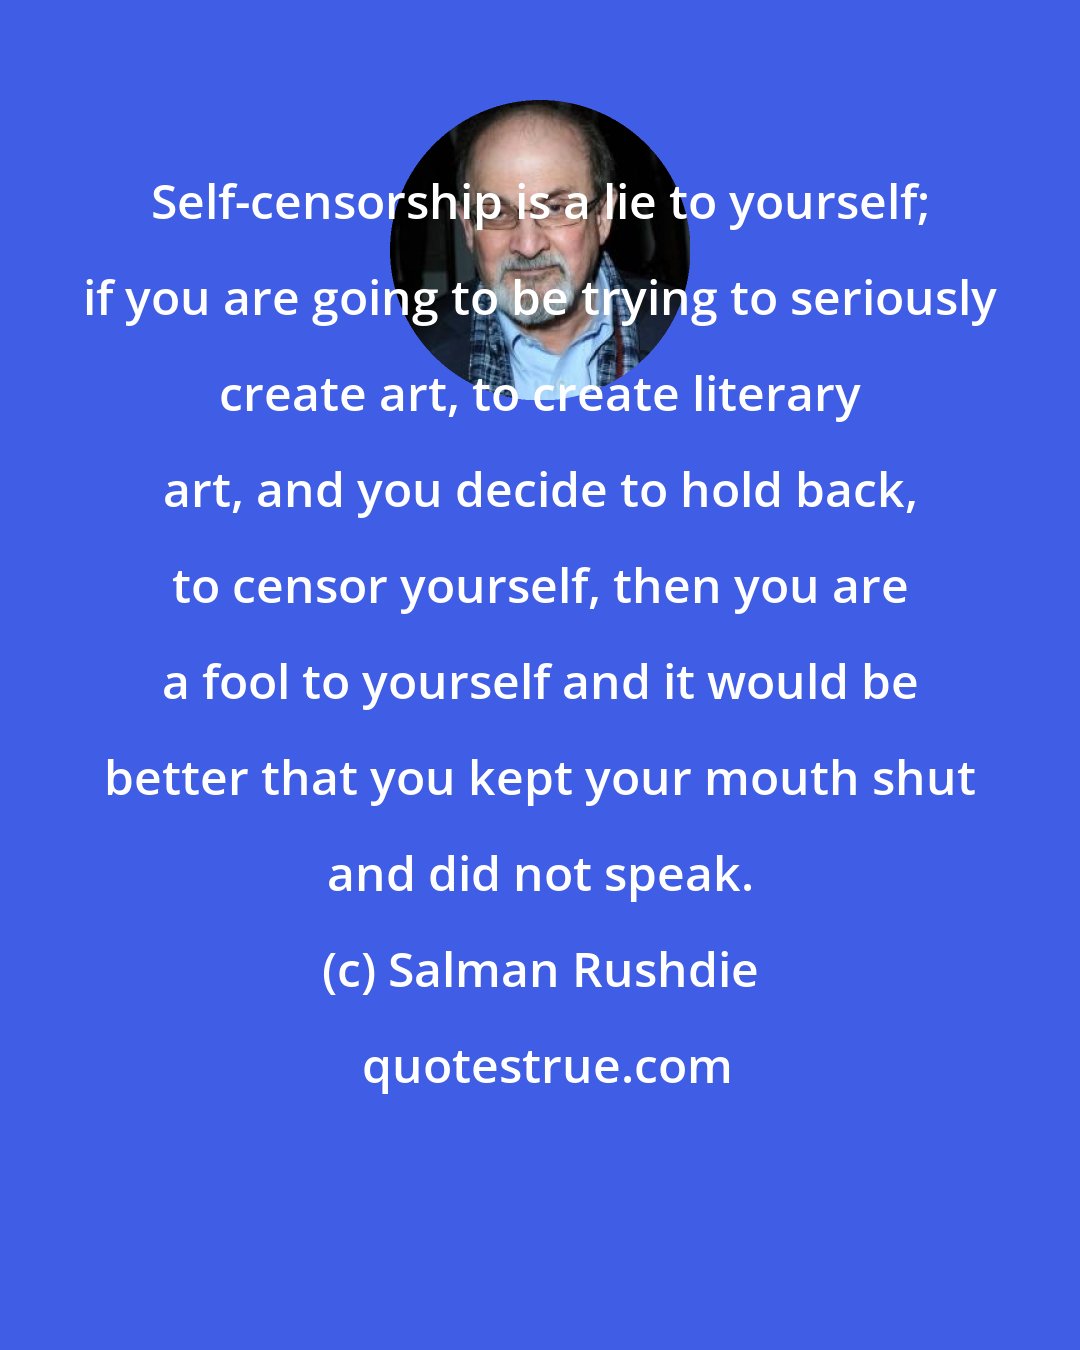 Salman Rushdie: Self-censorship is a lie to yourself; if you are going to be trying to seriously create art, to create literary art, and you decide to hold back, to censor yourself, then you are a fool to yourself and it would be better that you kept your mouth shut and did not speak.